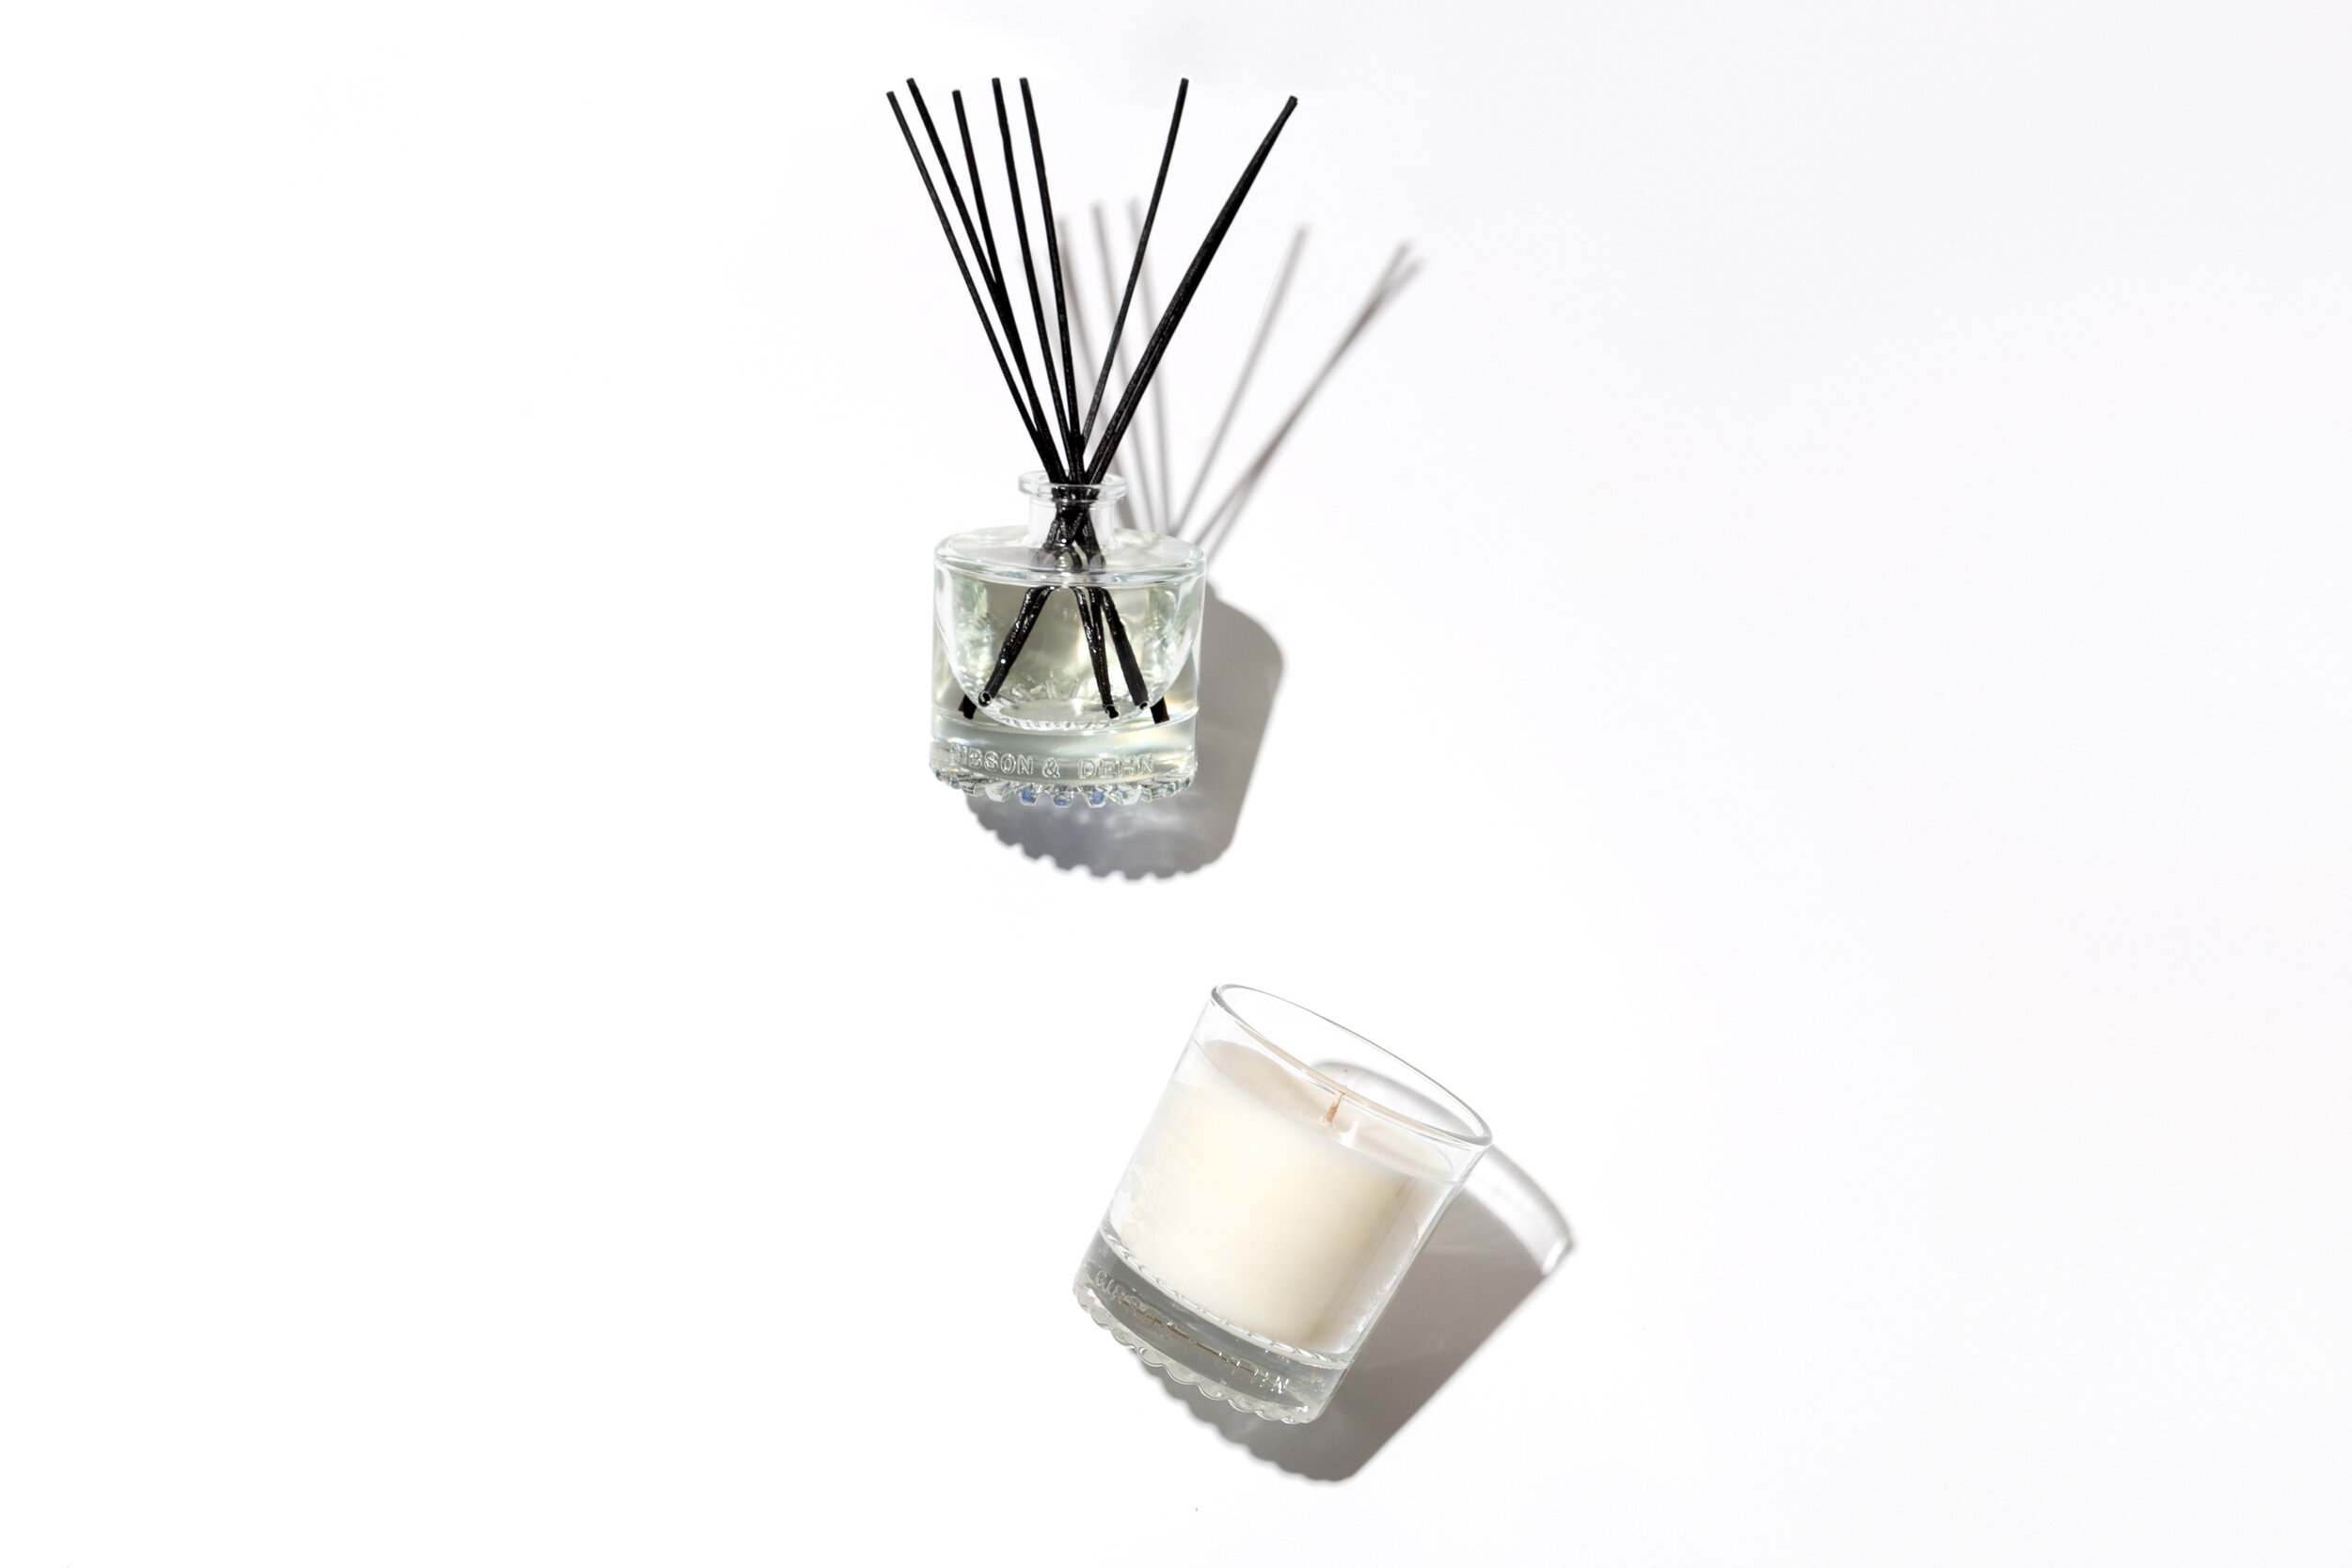 diffuser+candle-CT copy.jpg